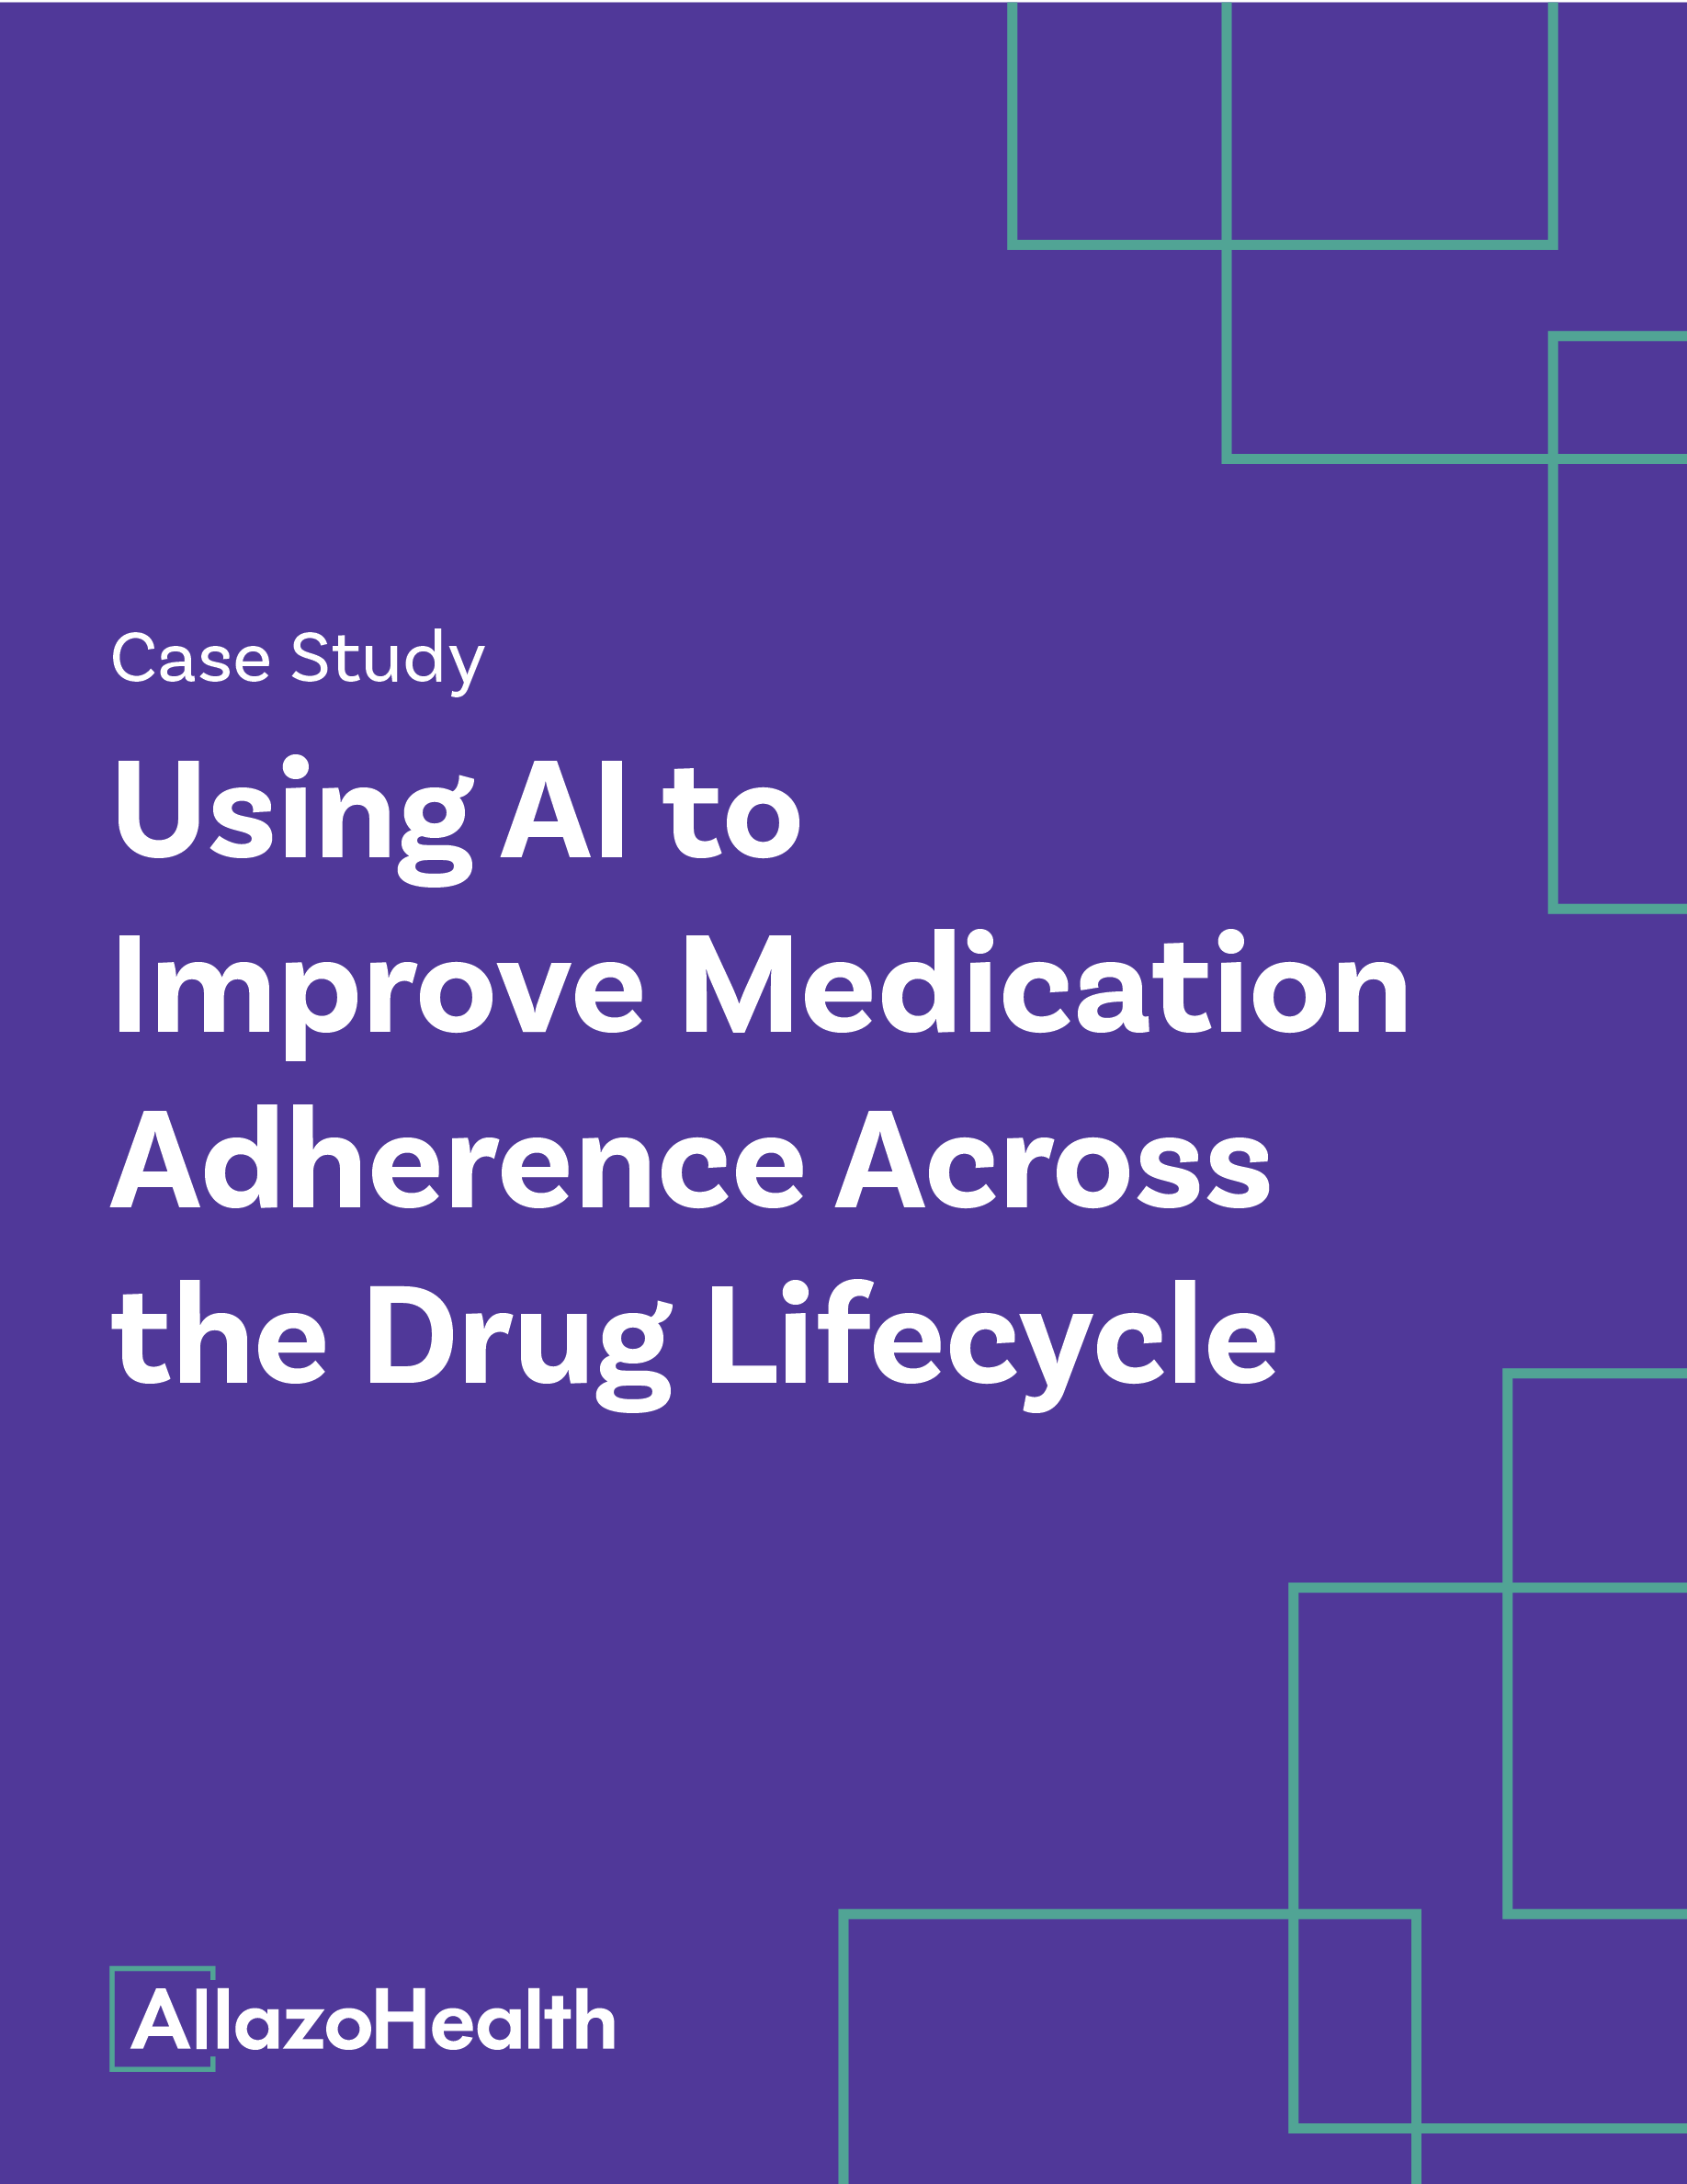 Case Study: Using AI to Improve Medication Adherence Across the Drug Lifecycle